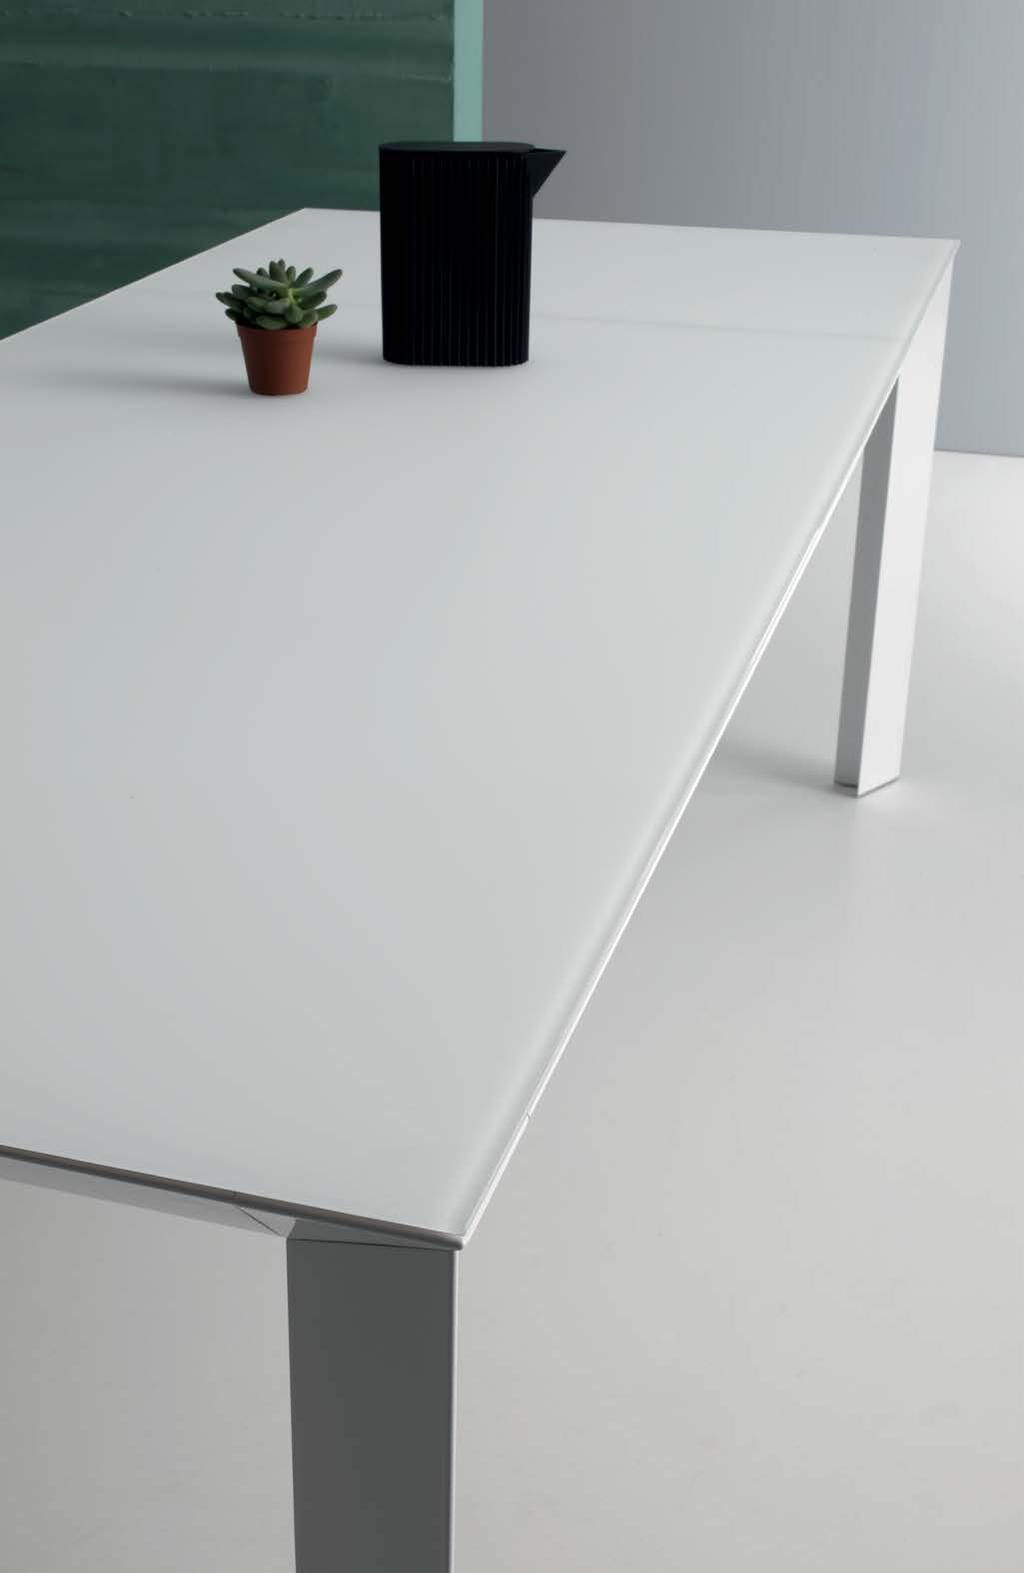 In this page: details of Diamante top and extension table with the Glue Point system, which consist in gluing a 6 mm thick top tempered glass or ceramic on an underneath panel 12 mm